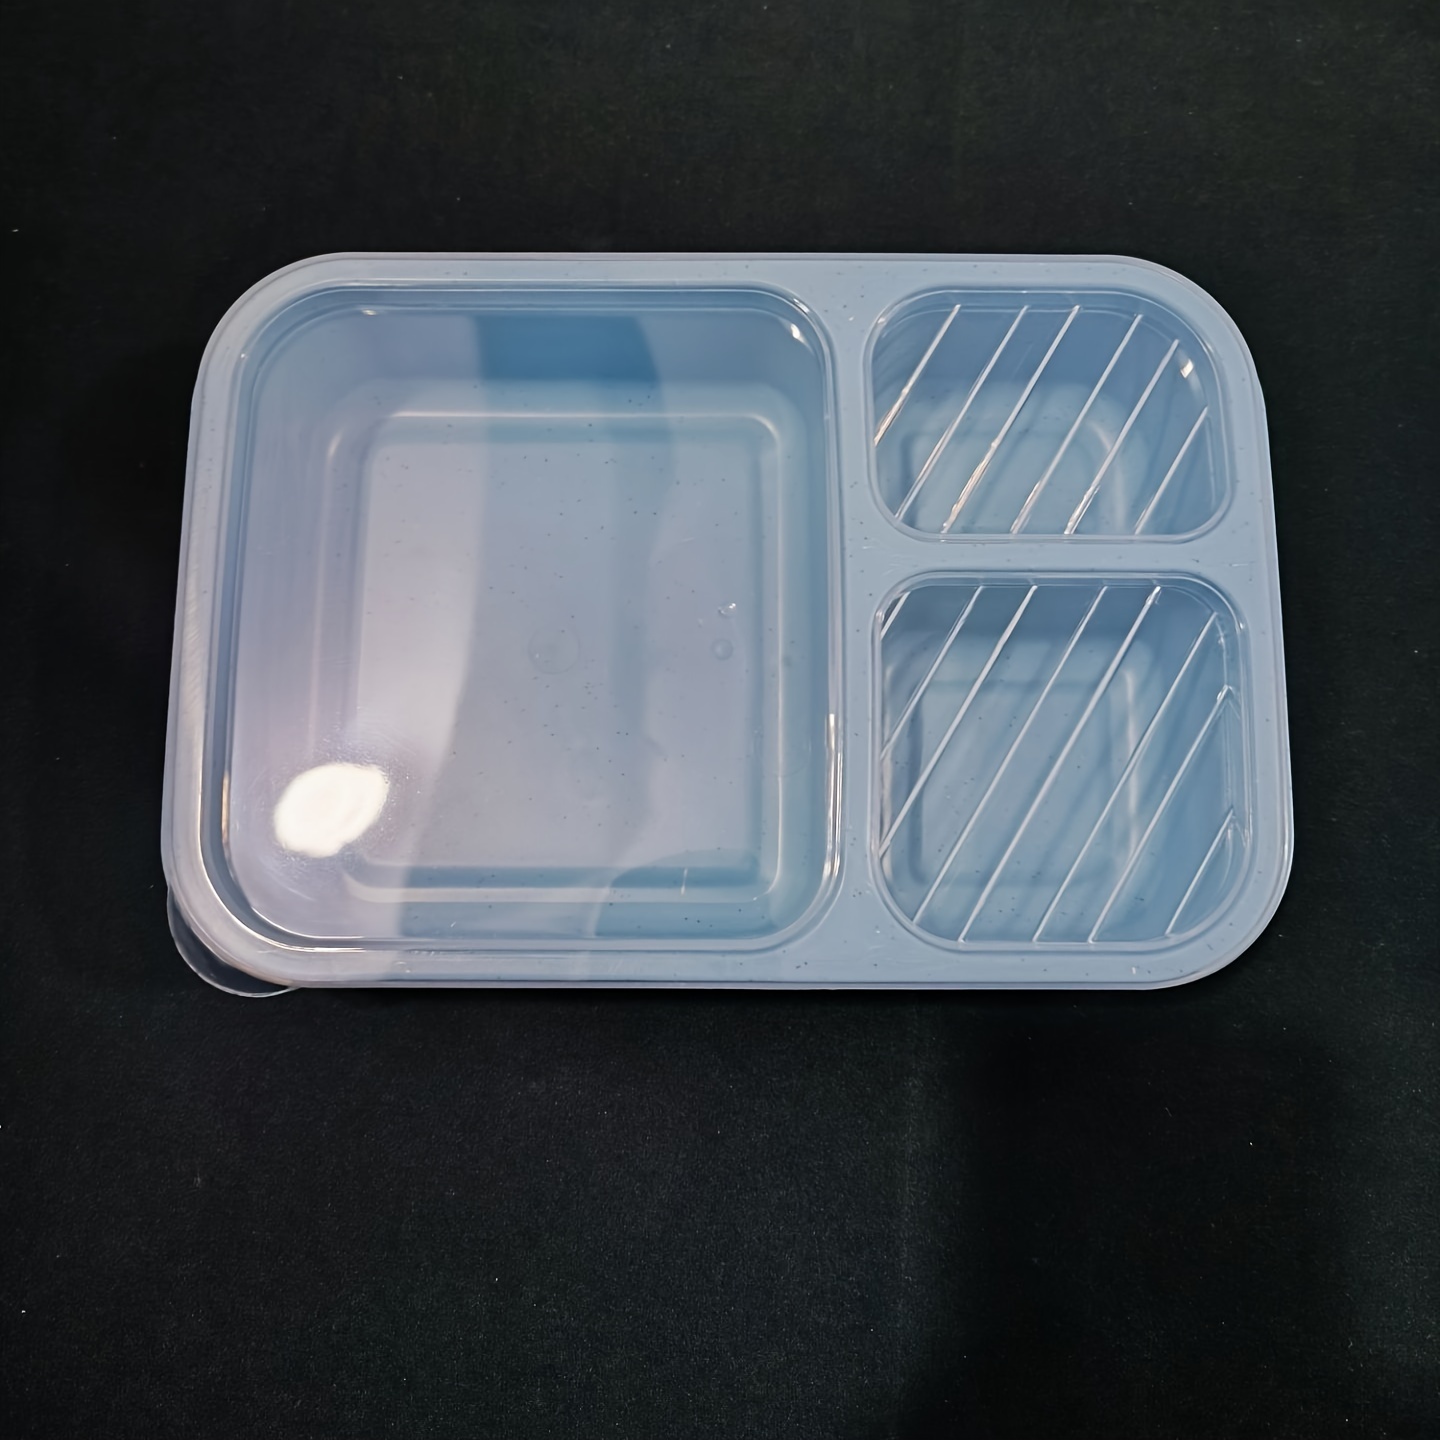 Leakproof And Light Blue Wheat Straw Divided Grid Lunch Box For